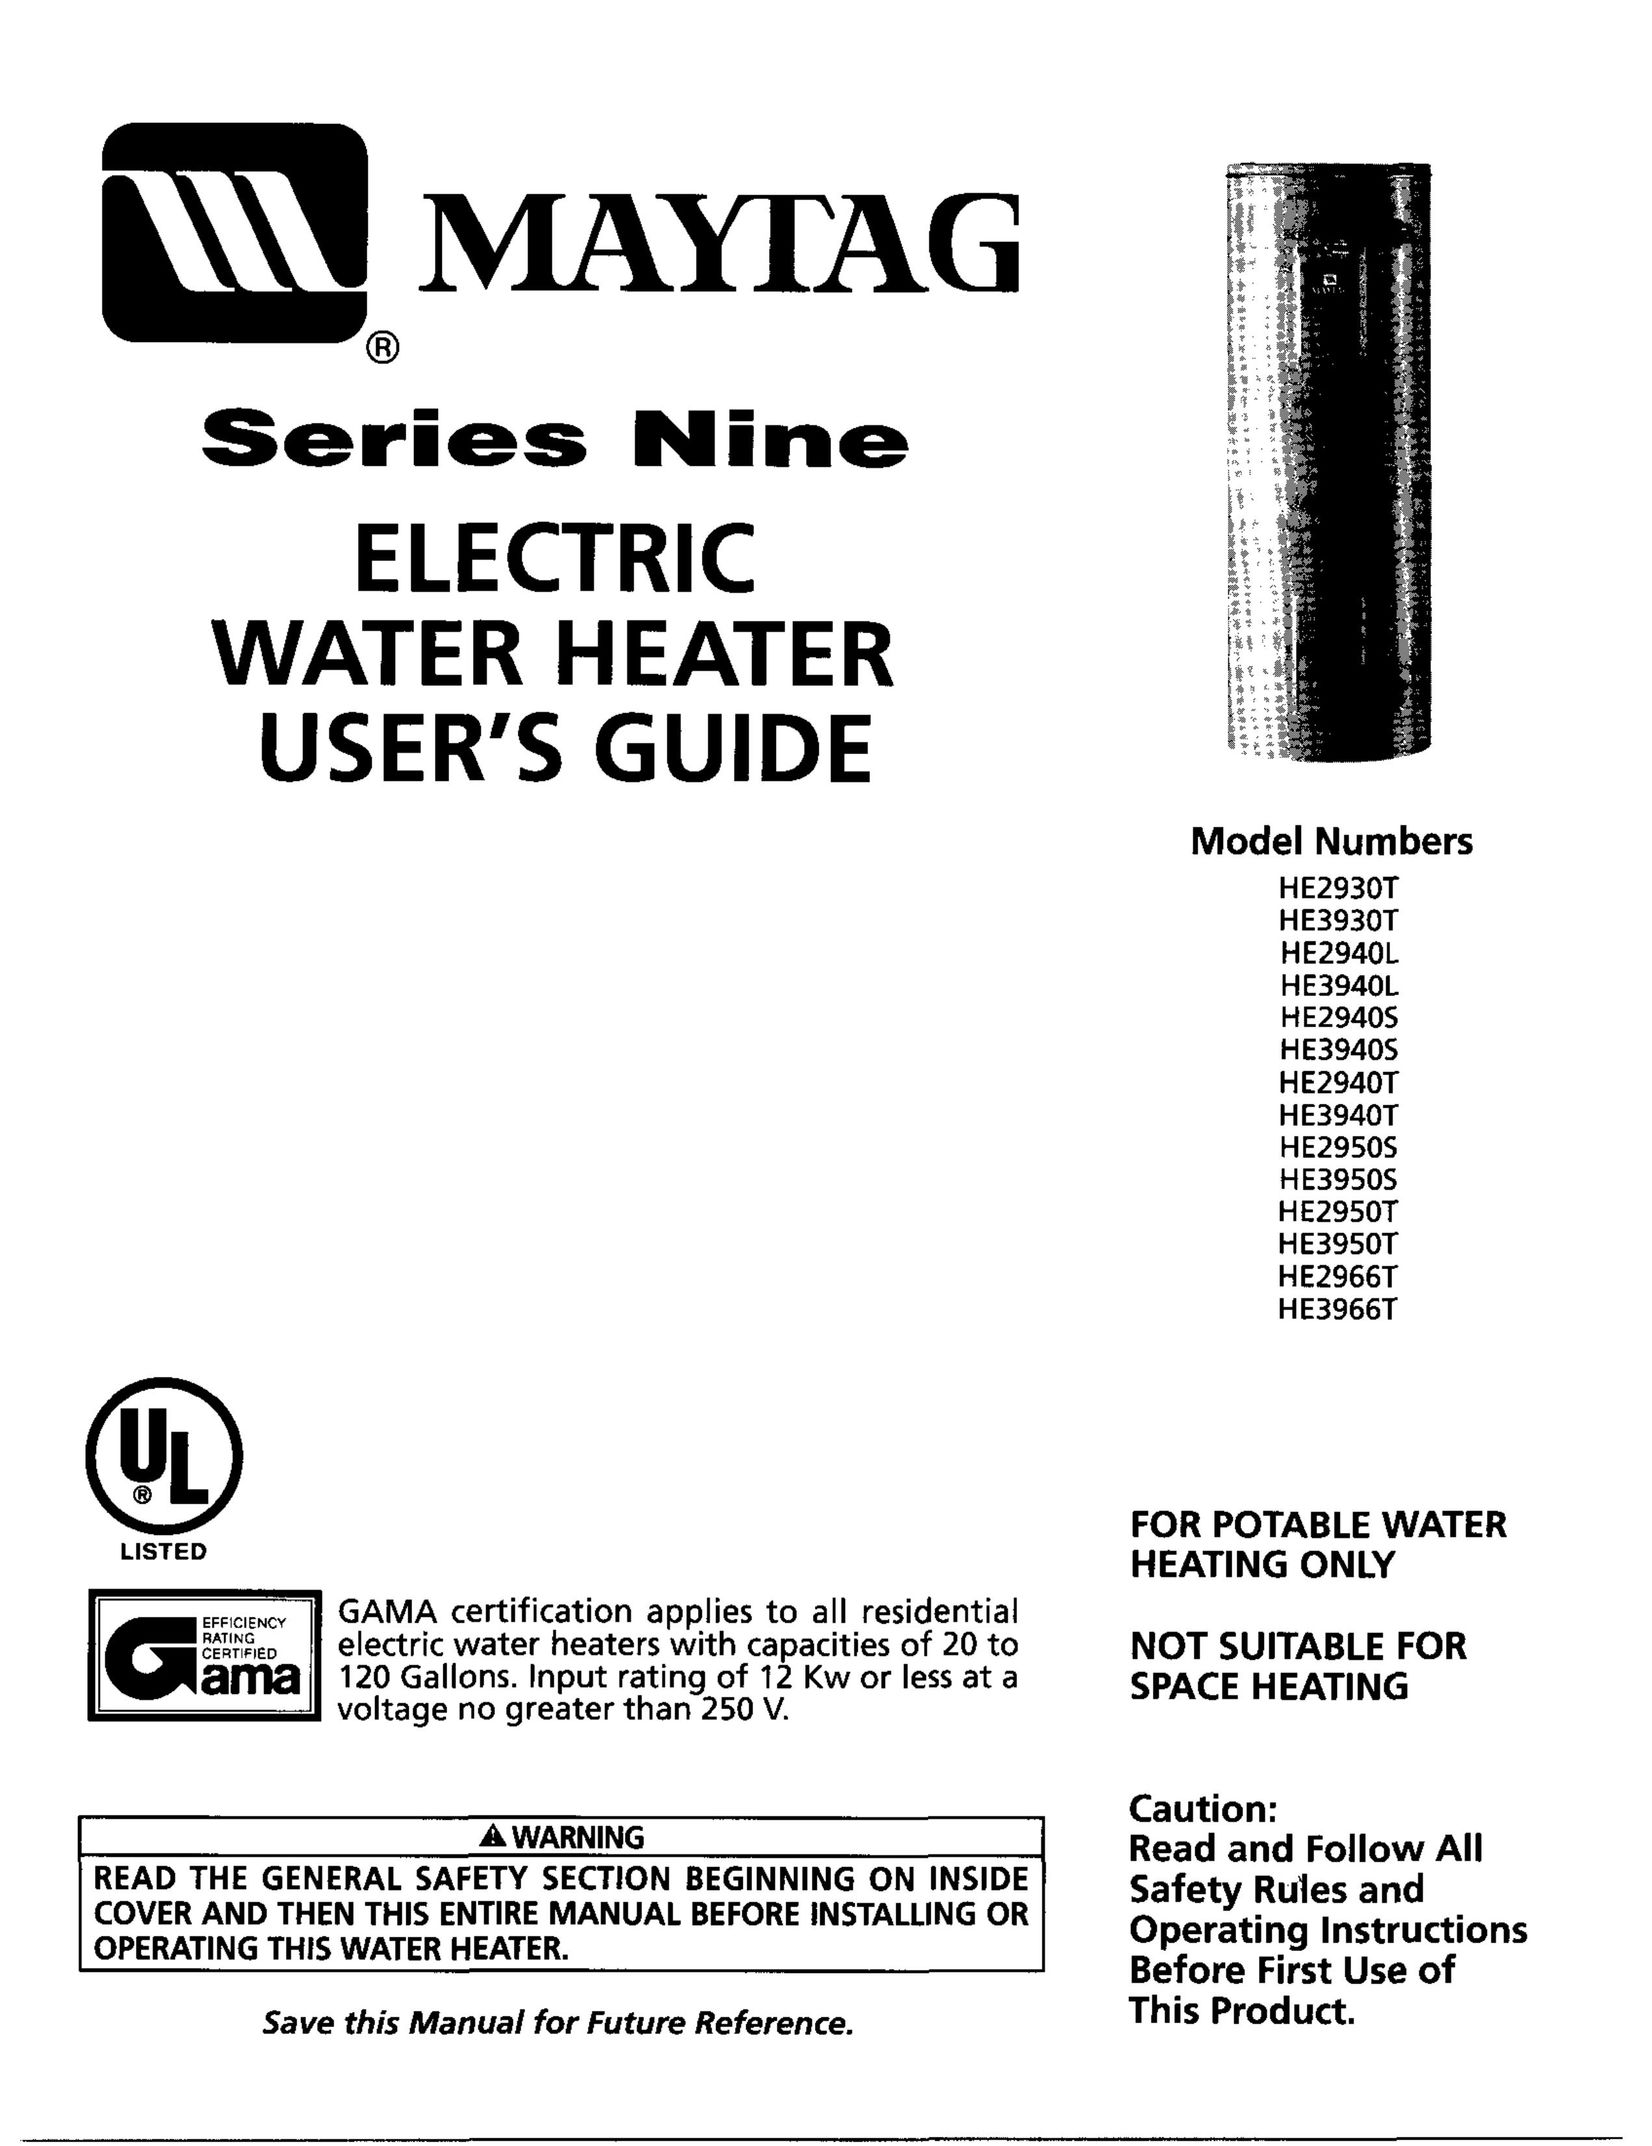 Maytag HE2966T Water Heater User Manual